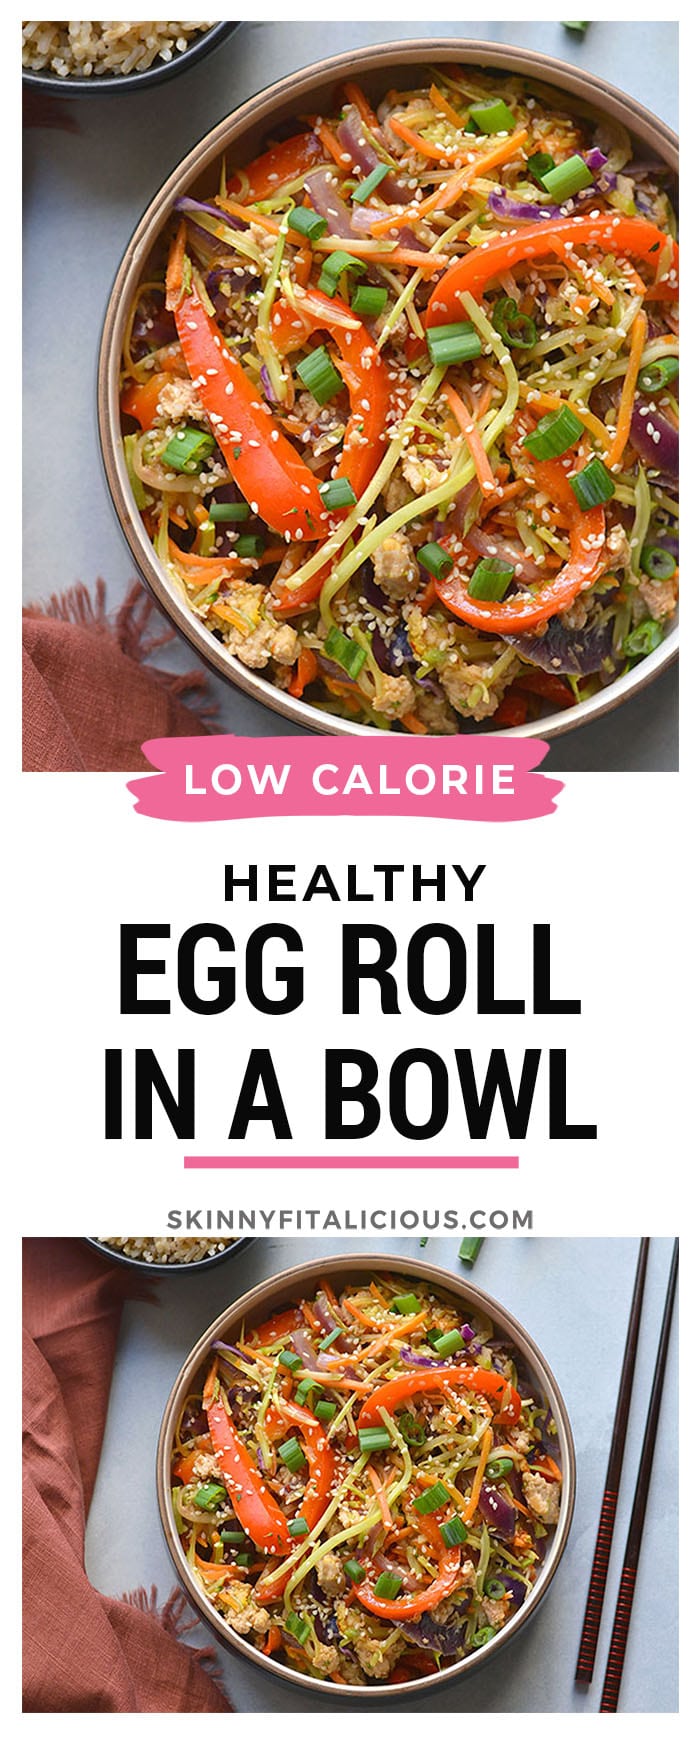 Healthy Egg Roll In A Bowl is an easy, gluten free and low calorie recipe that's made sugar free without a deep fried wrapper. A healthy weeknight dinner! Gluten Free + Low Calorie 